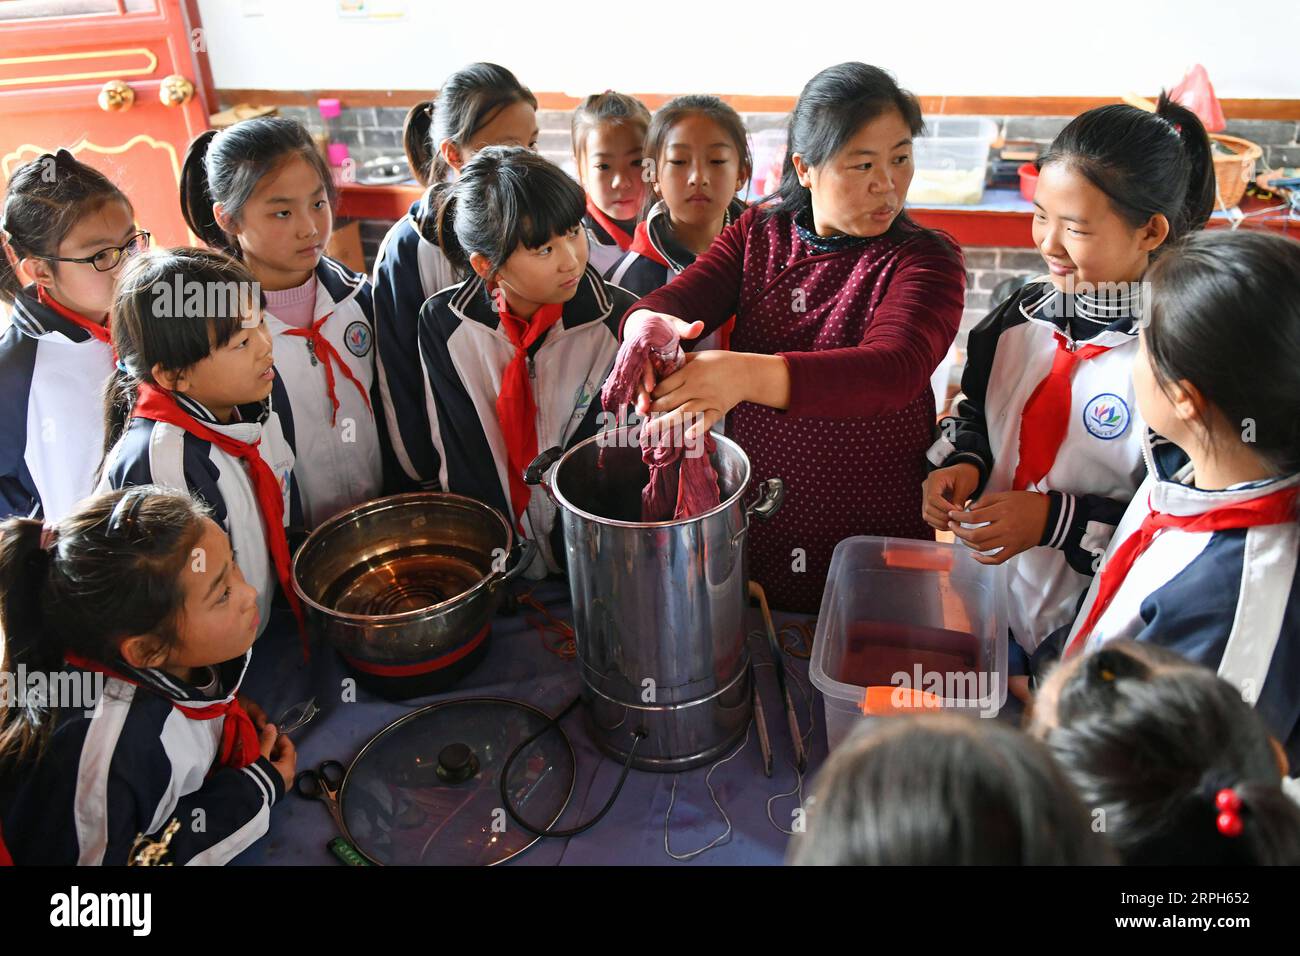 191031 -- JINAN, Oct. 31, 2019 -- Pupils of Xixian primary school experience the art of vegetation dyeing at Lubei intangible cultural heritage experiencing center in Wudi County, east China s Shandong Province, Oct. 30, 2019. The experiencing center provides a variety of intangible cultural heritage experiencing programs, including the arts of rubbing, ceramics, tie dyeing, paper-making and movable-type printing, aiming to promote traditional Chinese culture through immersive experience.  CHINA-SHANDONG-JINAN-INTANGIBLE CULTURAL HERITAGE-CENTER CN ZhuxZheng PUBLICATIONxNOTxINxCHN Stock Photo